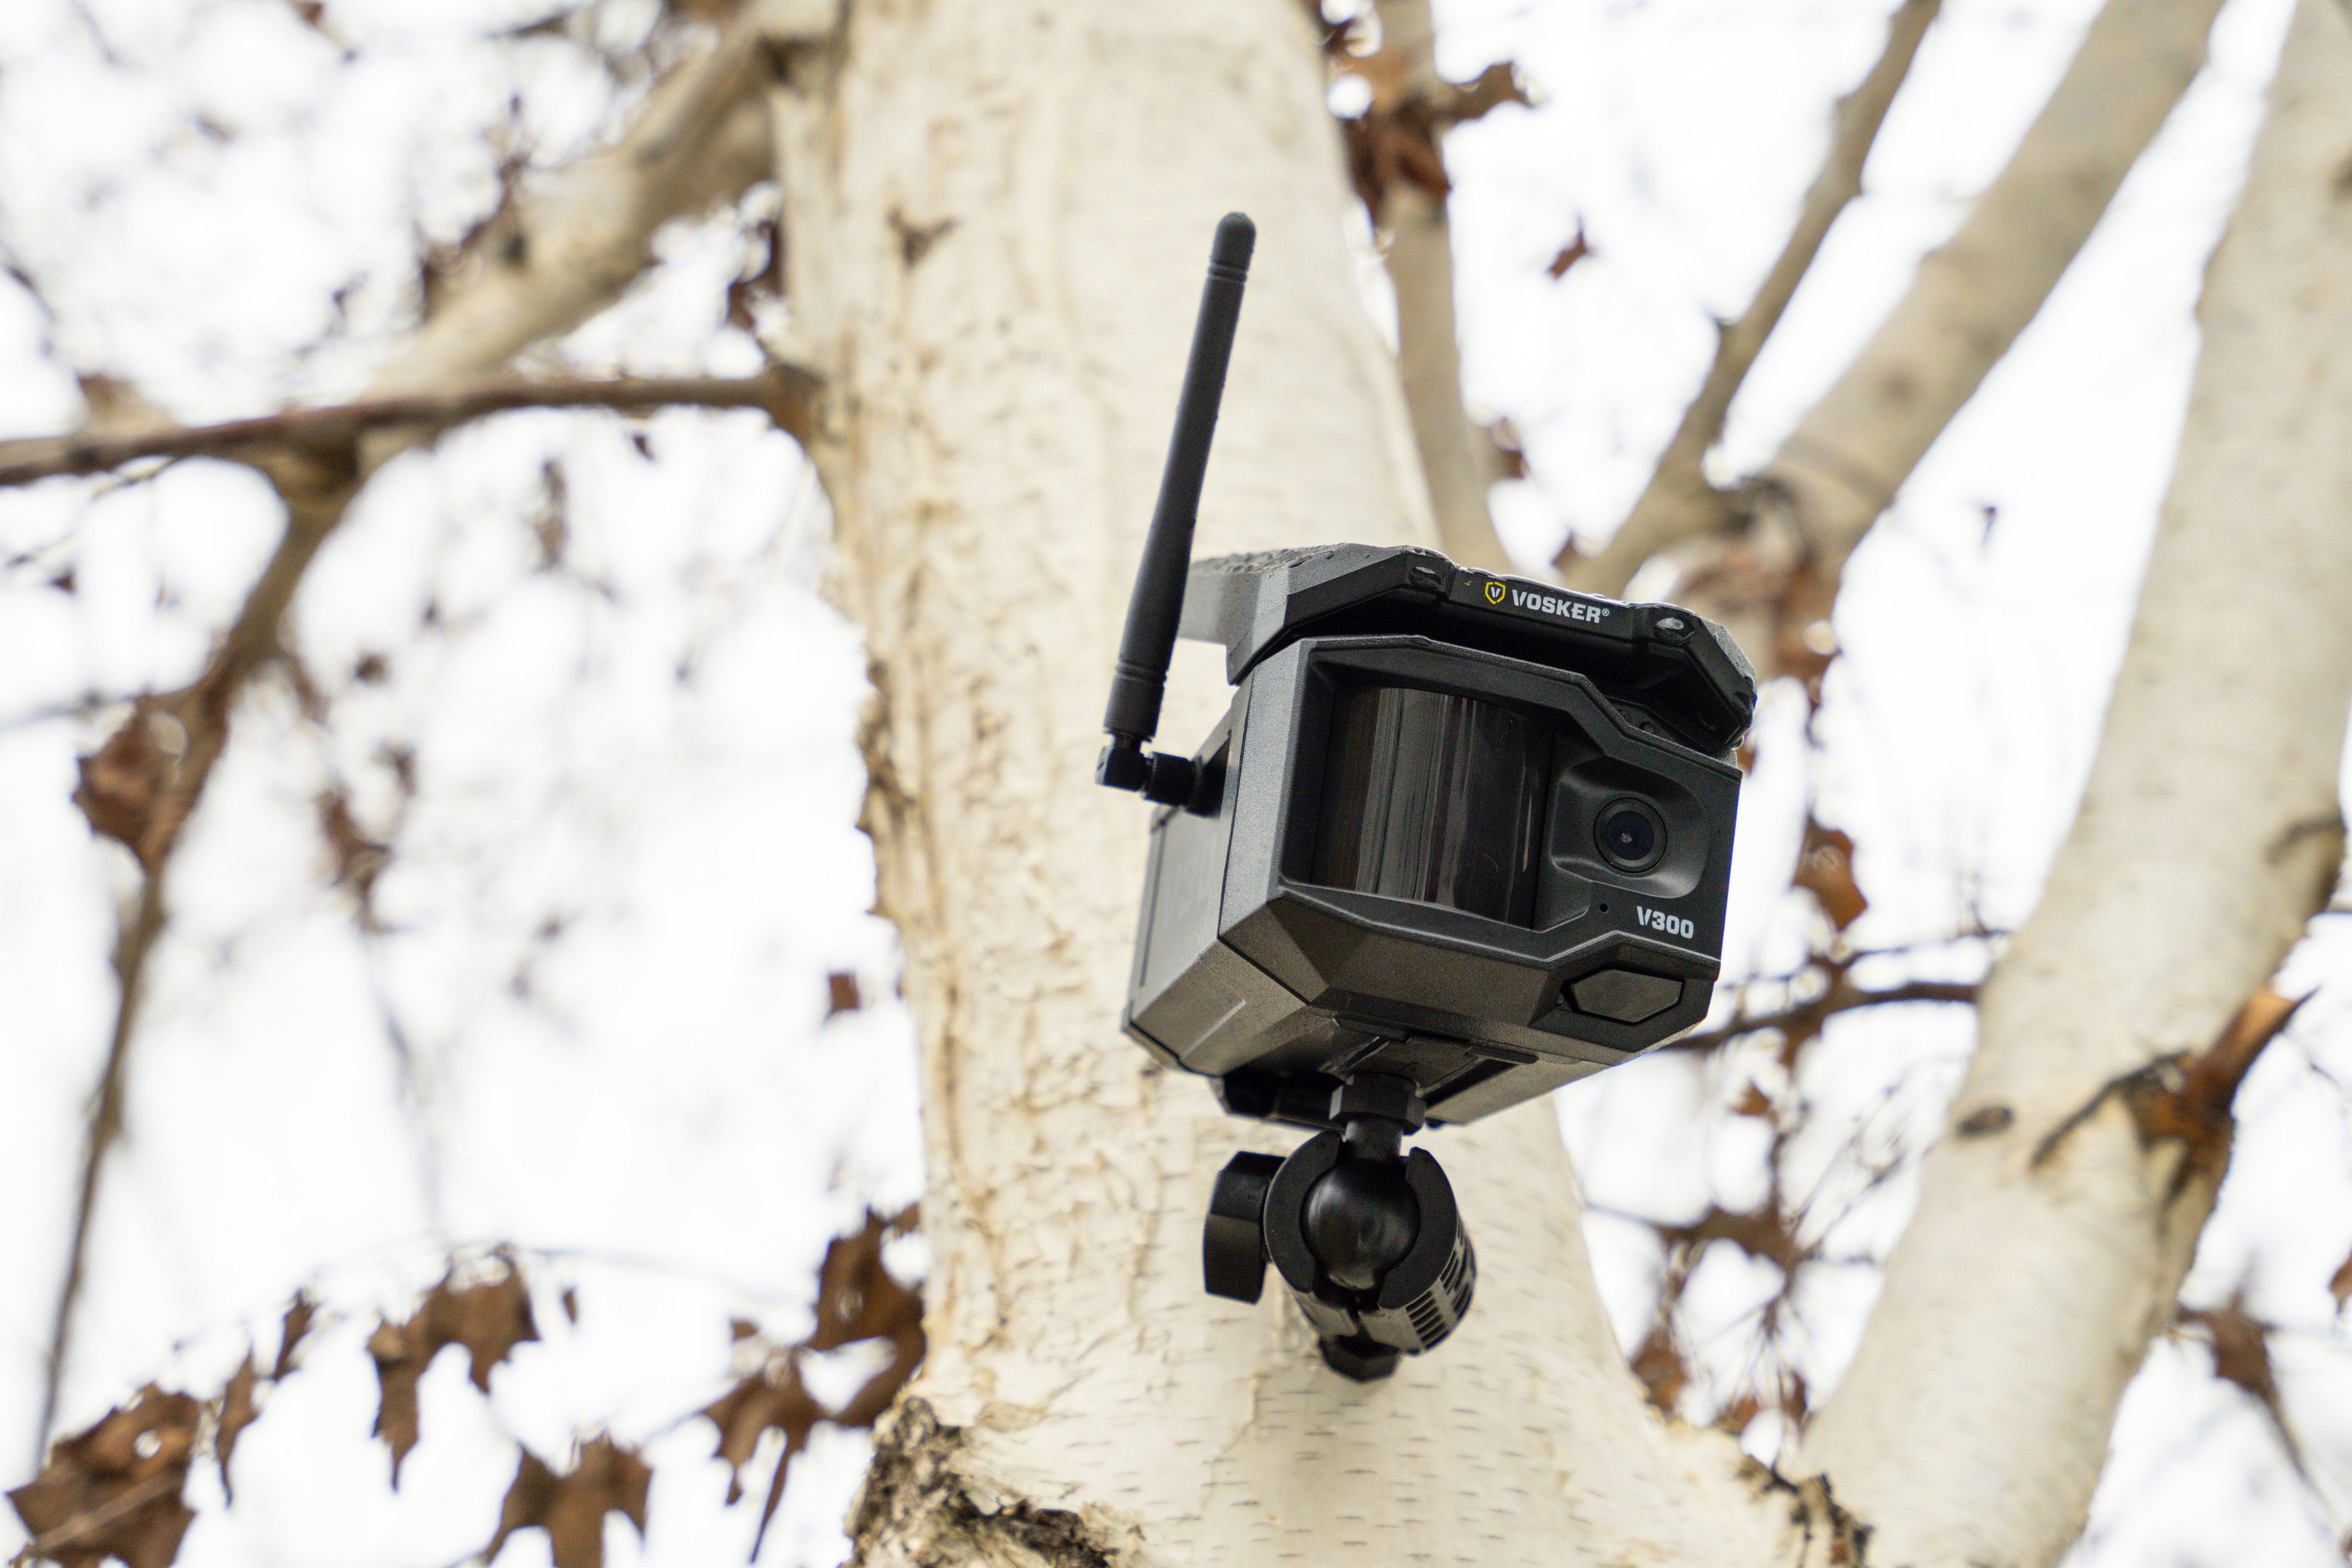 Ex-iPod director launches LTE-connected Owl security camera for